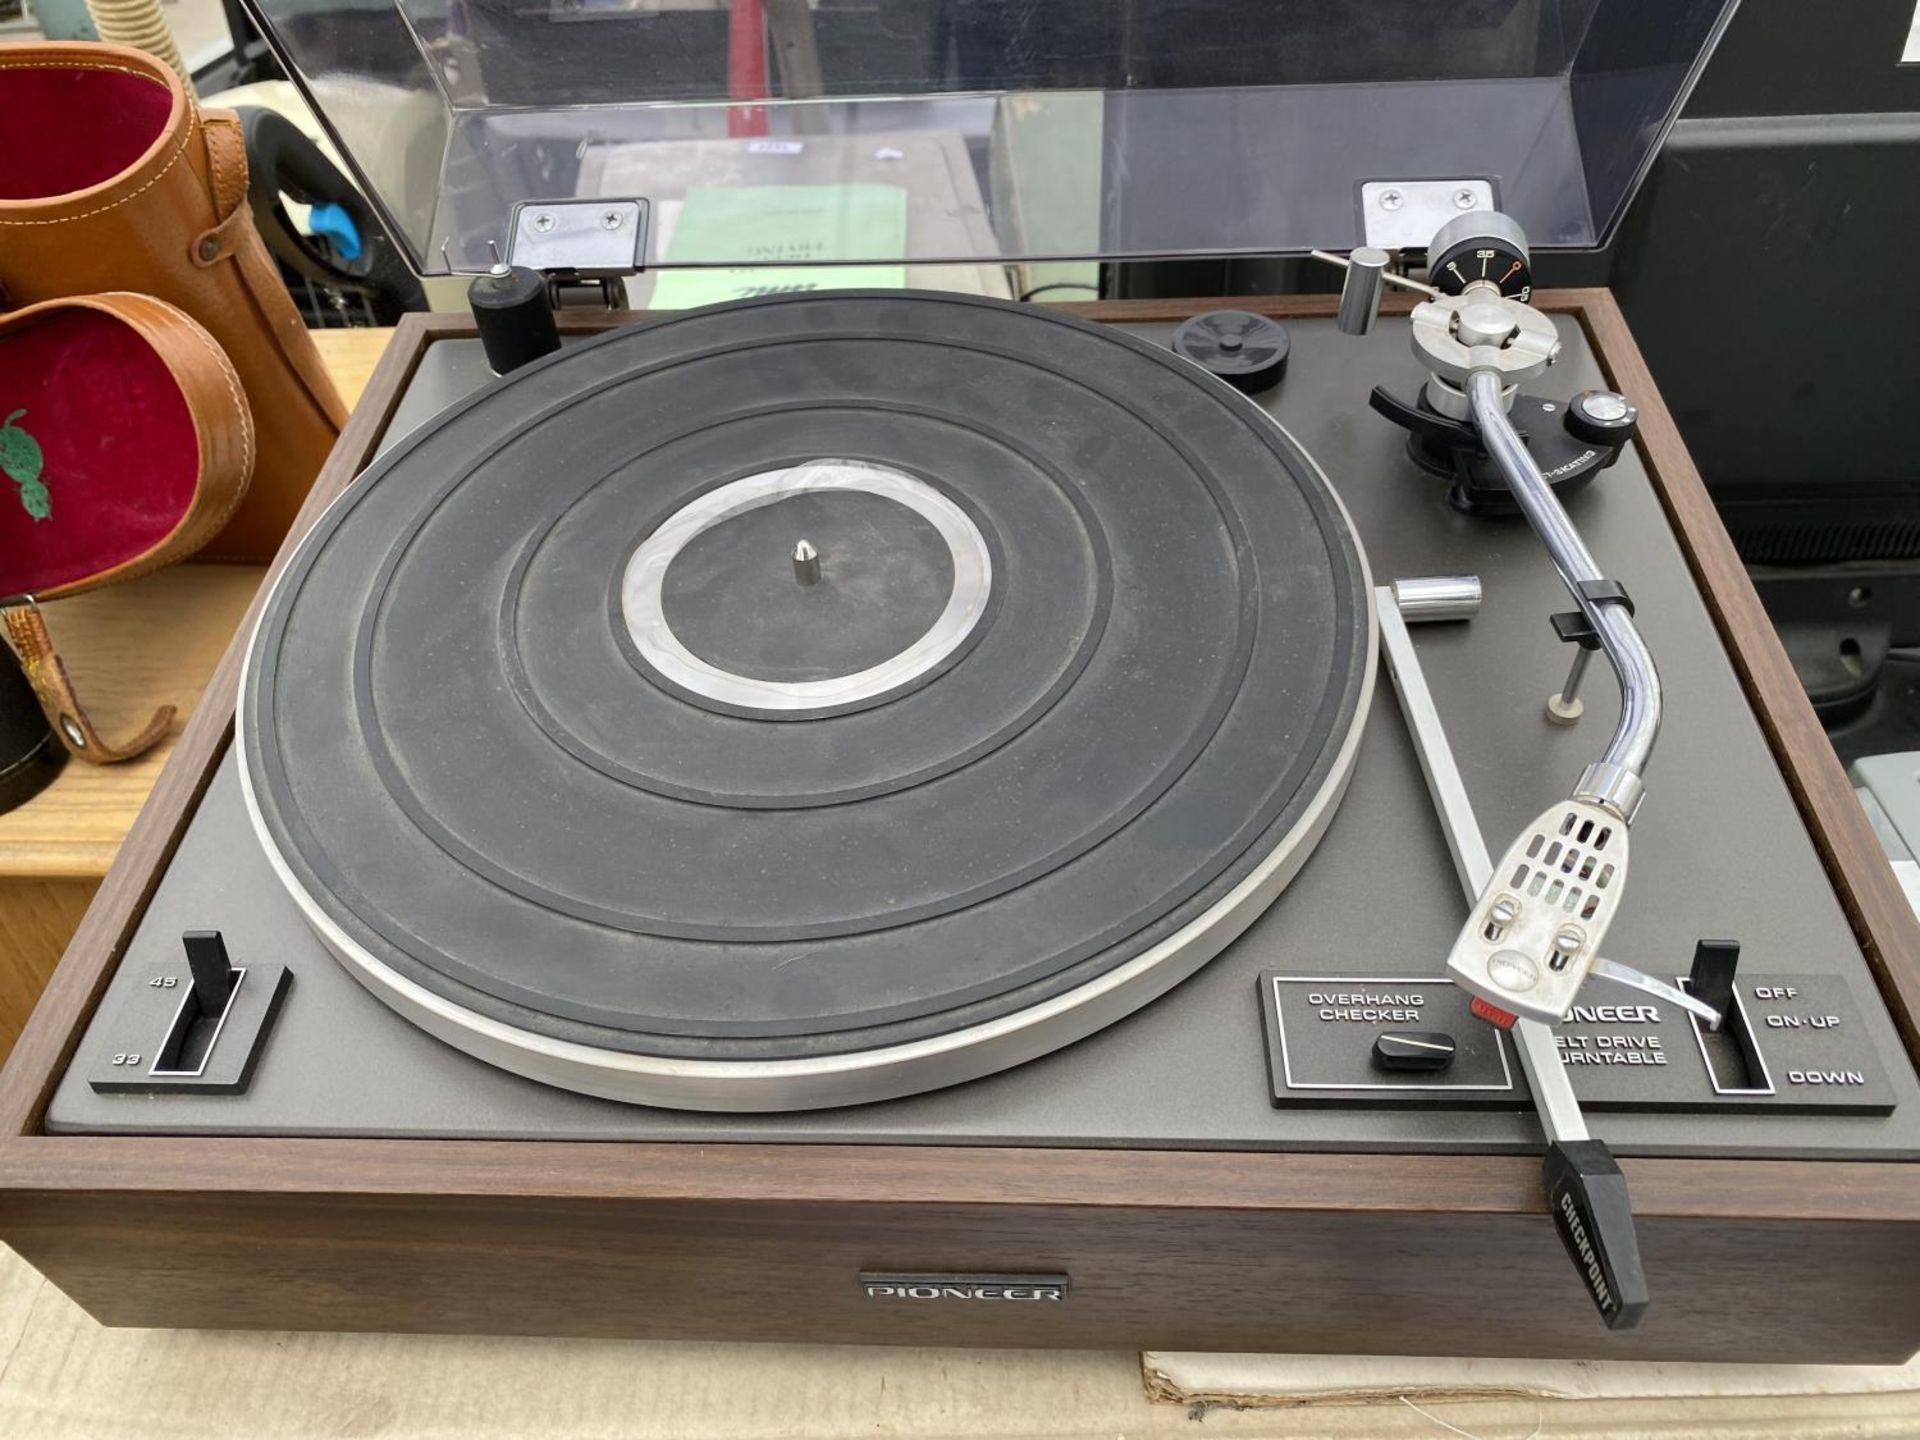 A PIONEER BELT DRIVEN TURNTABLE - Image 2 of 3